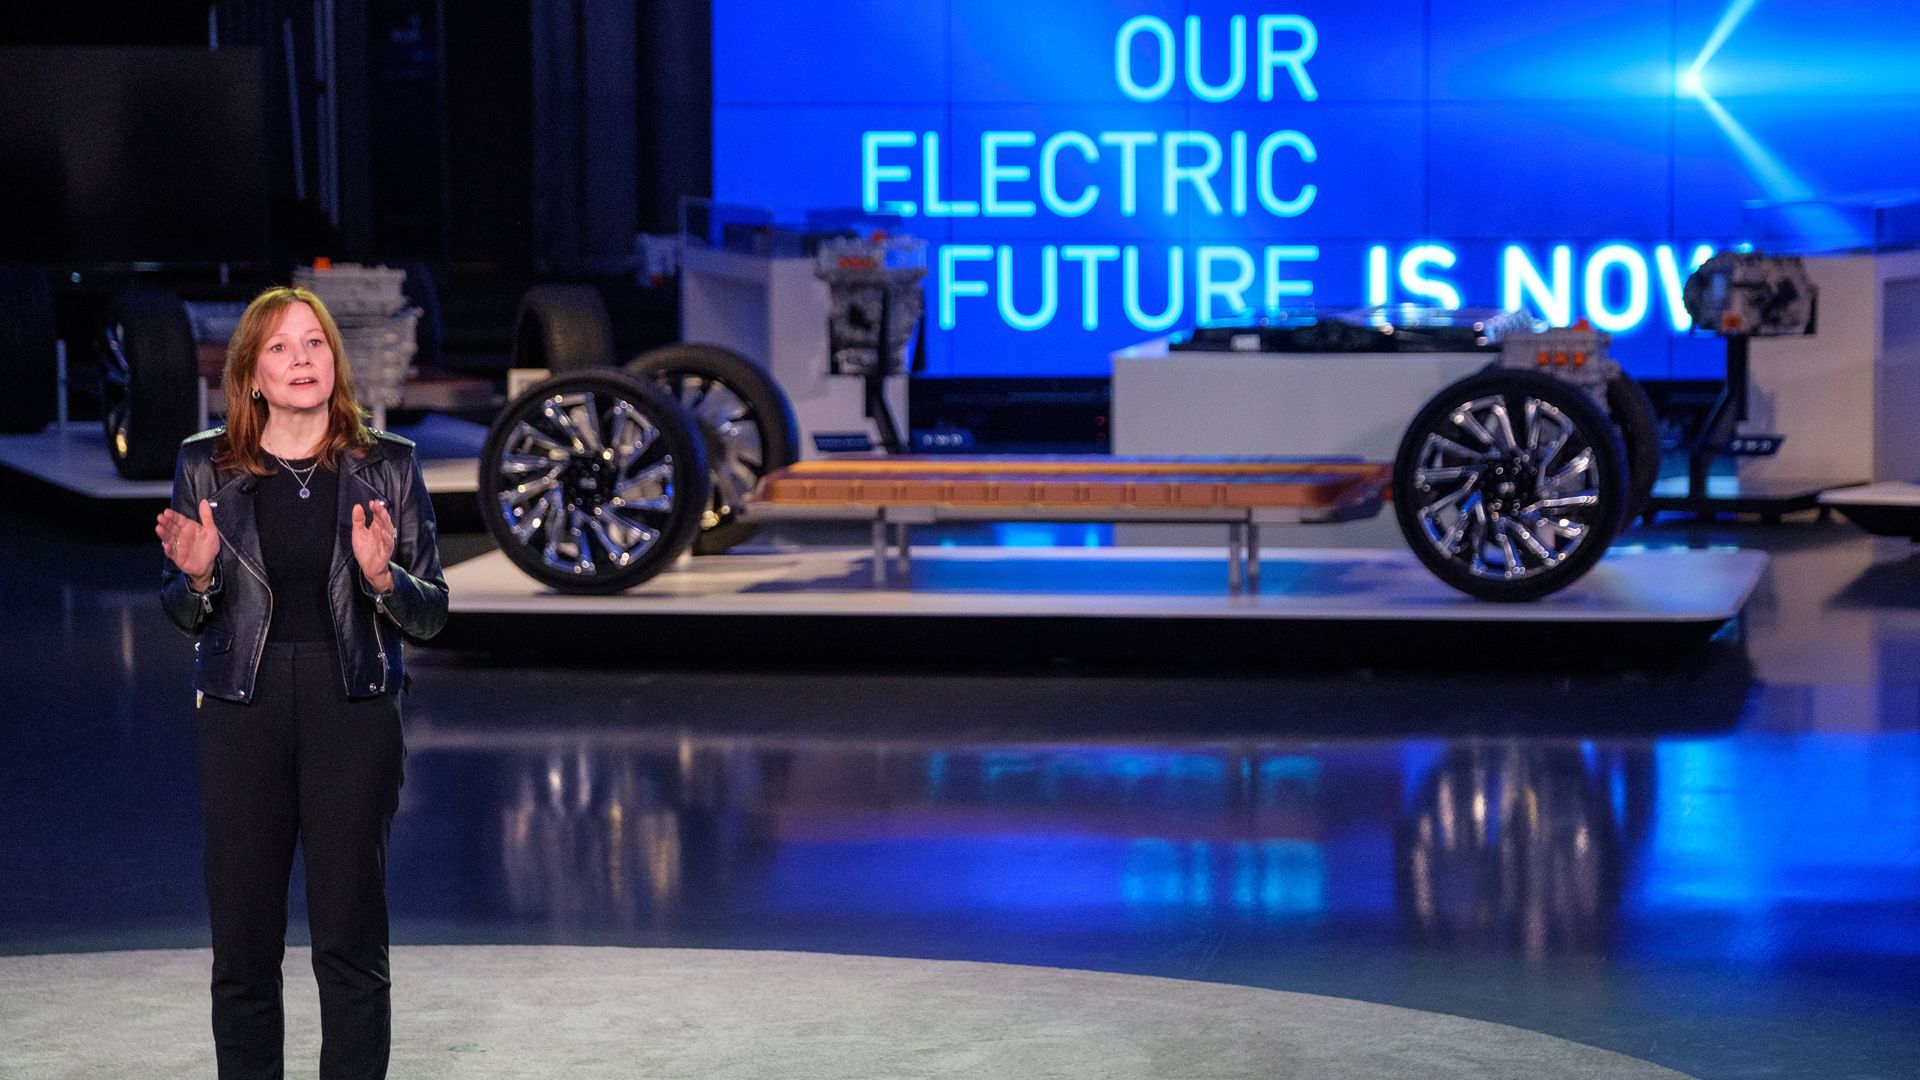 Image of Mary Barra with electric vehicle platform